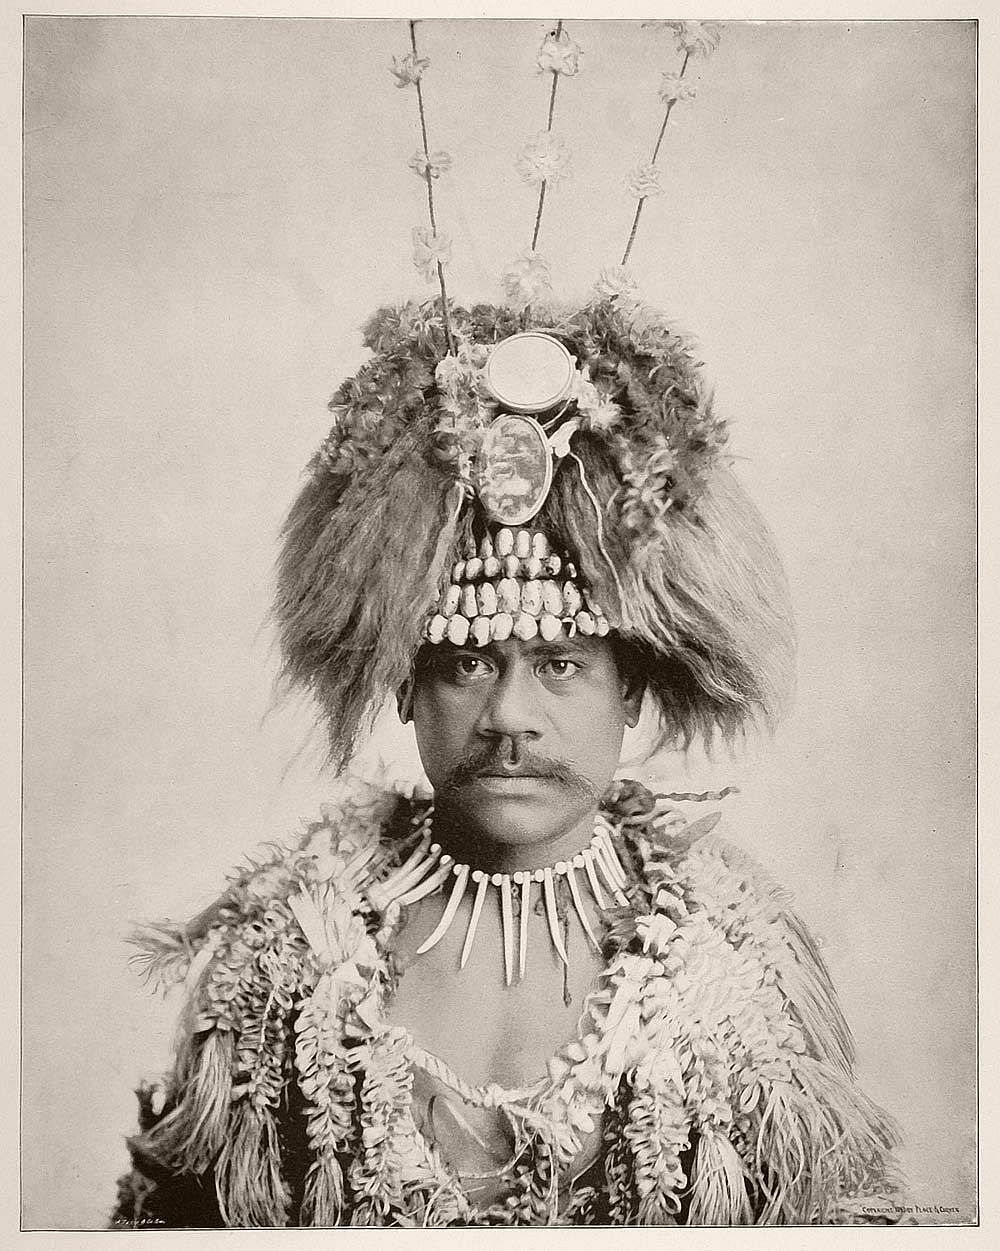 William, a Samoan man, in his traditional costume and elaborate headdress.